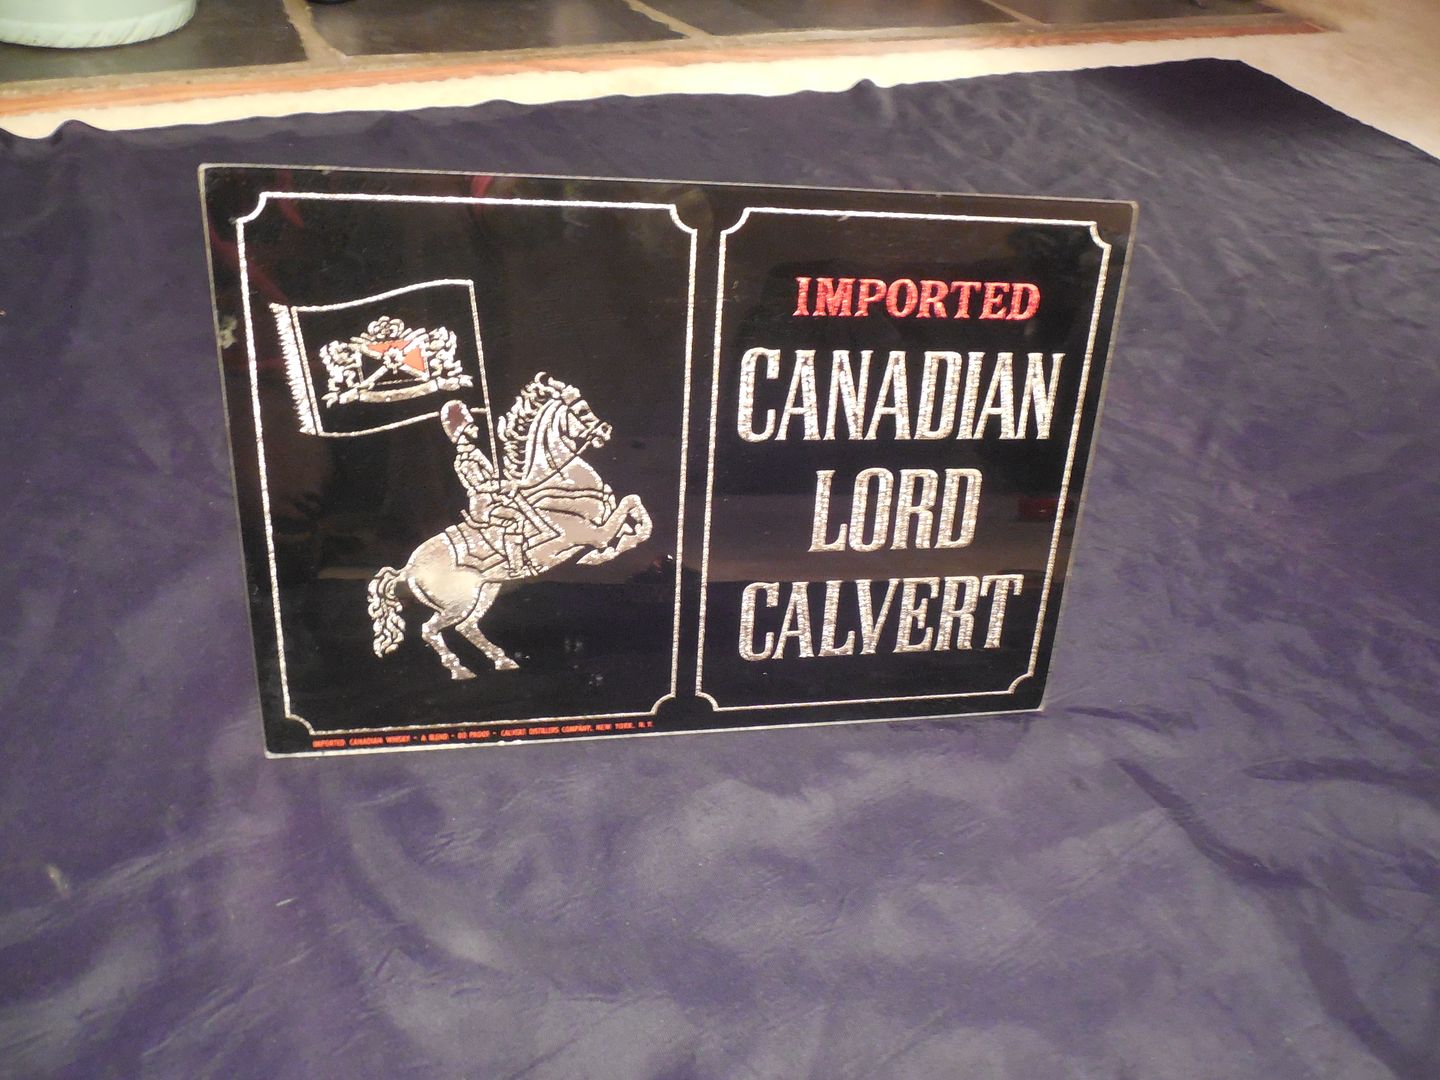 Report to lord calvert